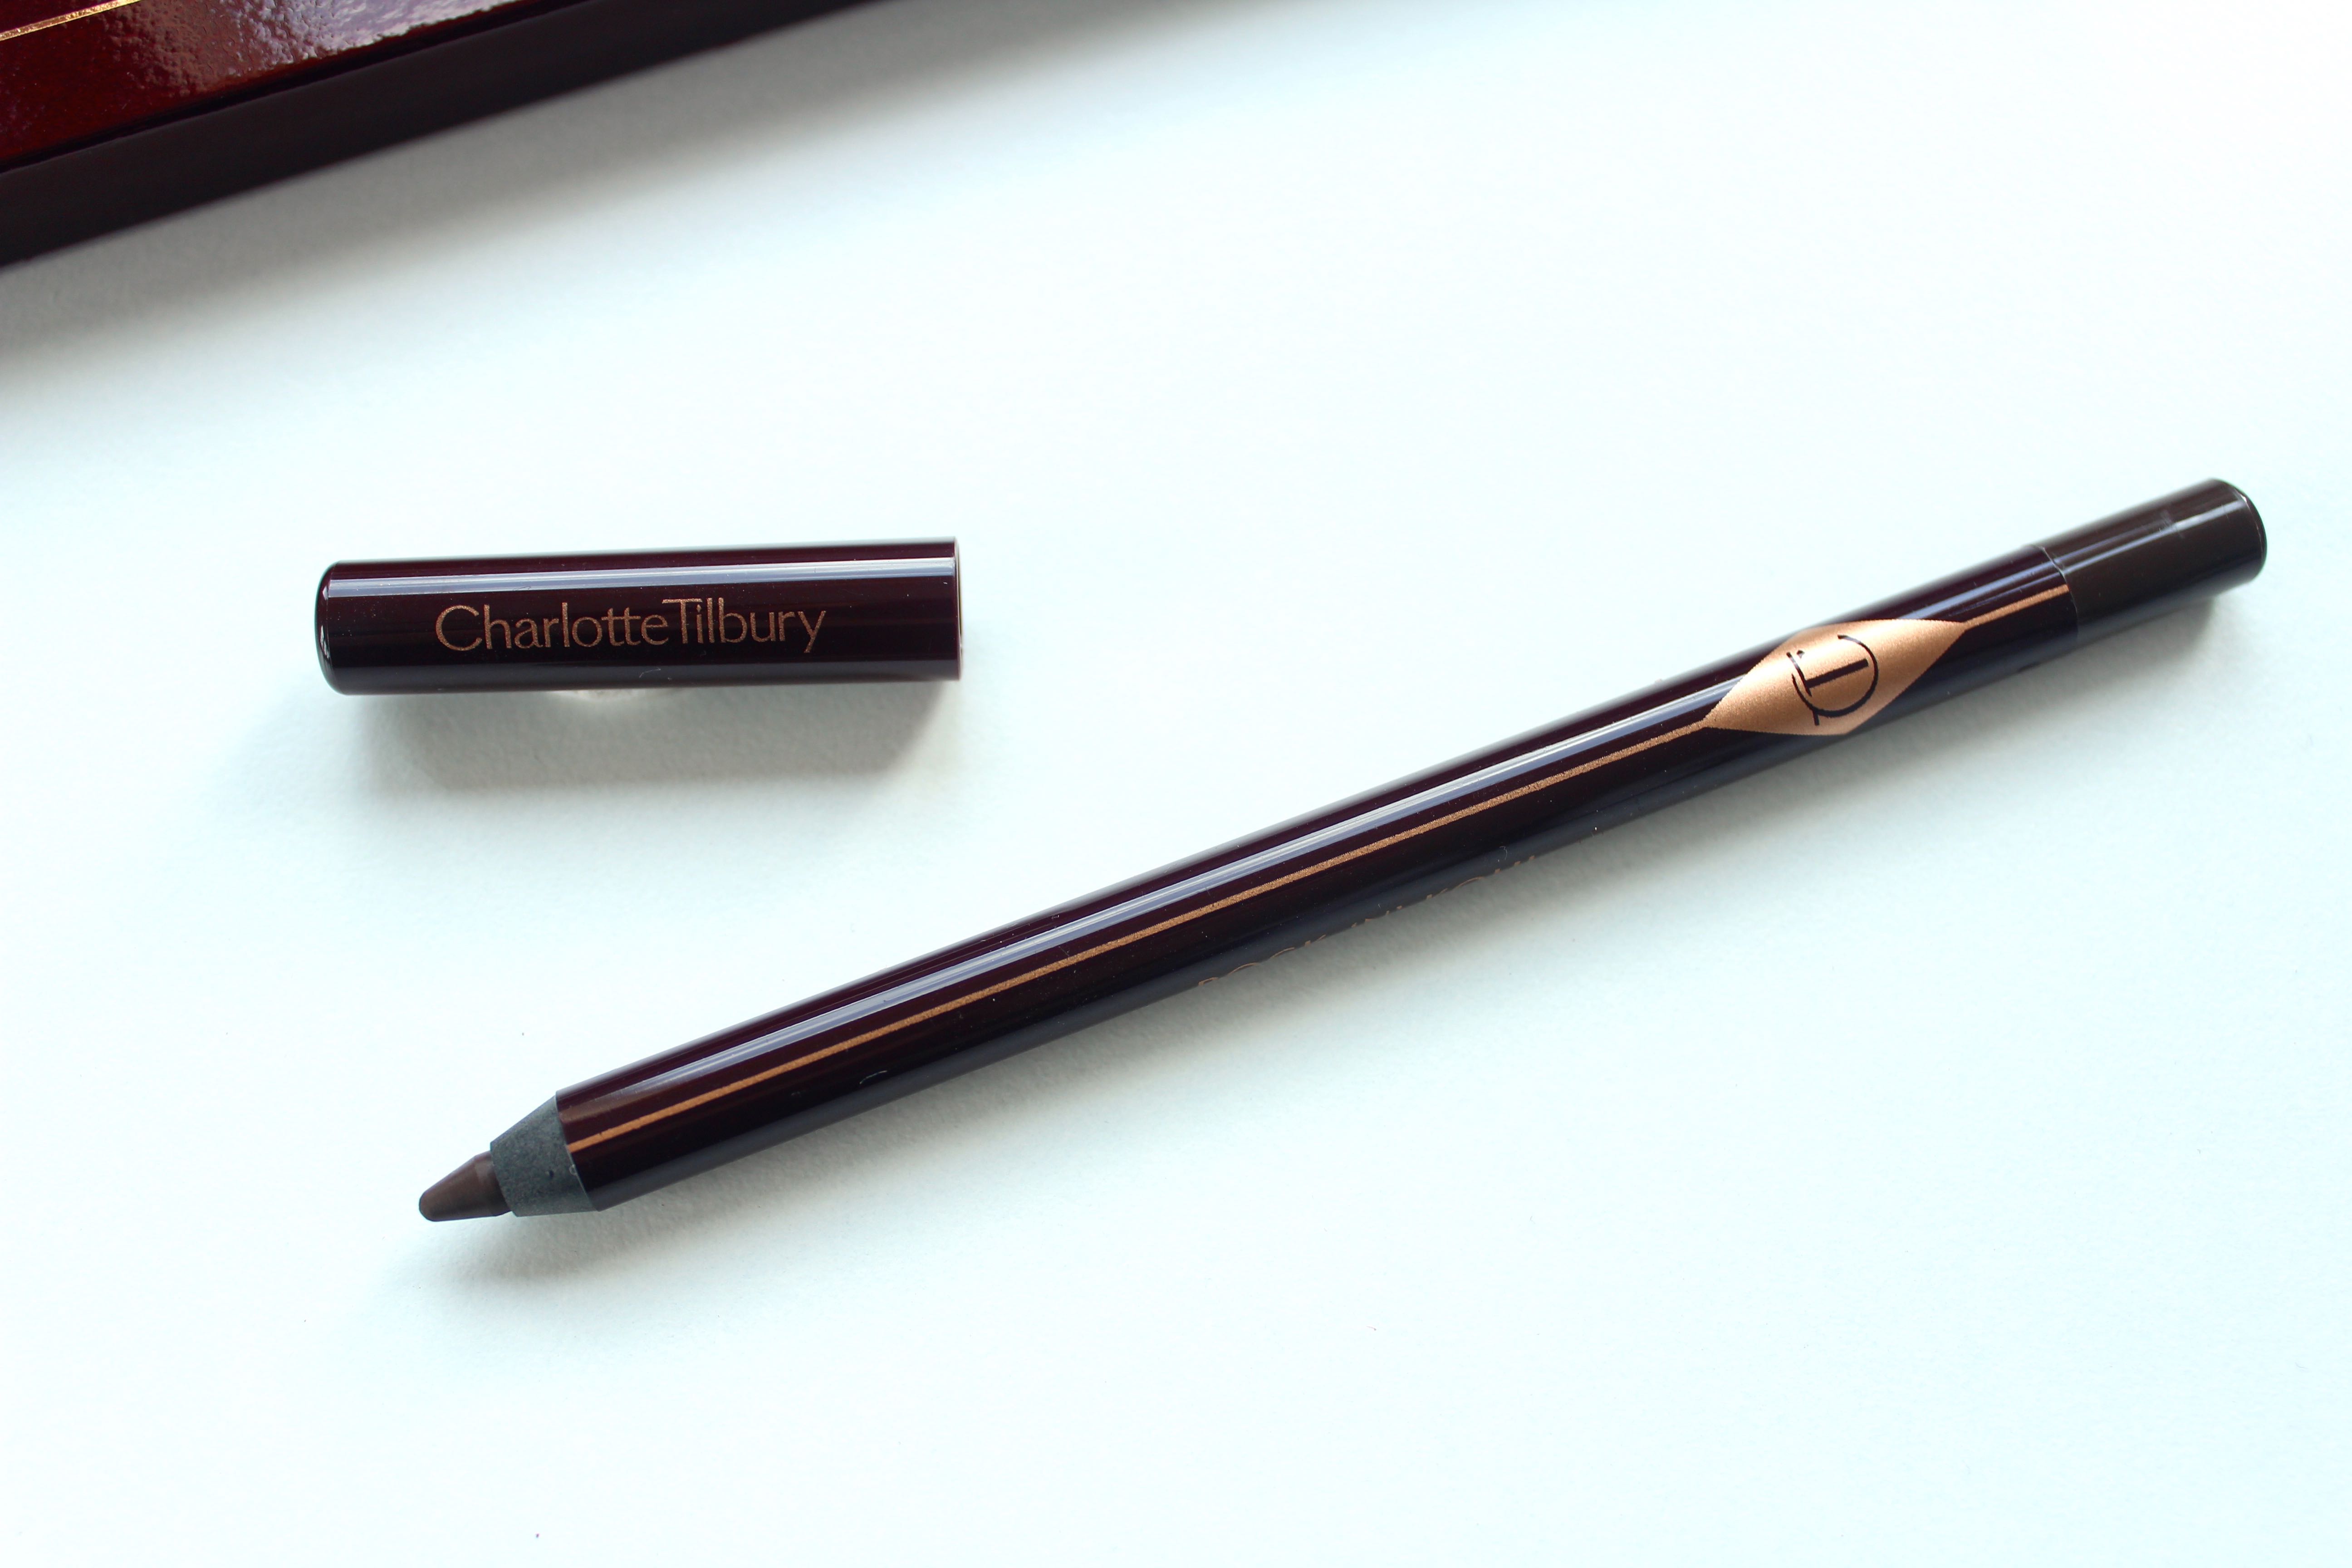 Charlotte-Tilbury-haul-and-product-review-all-in-one-Rock-'n'-kohl-iconic-liquid-eye-pencil-in-barbarella-brown-by-face-made-up-facemadeup